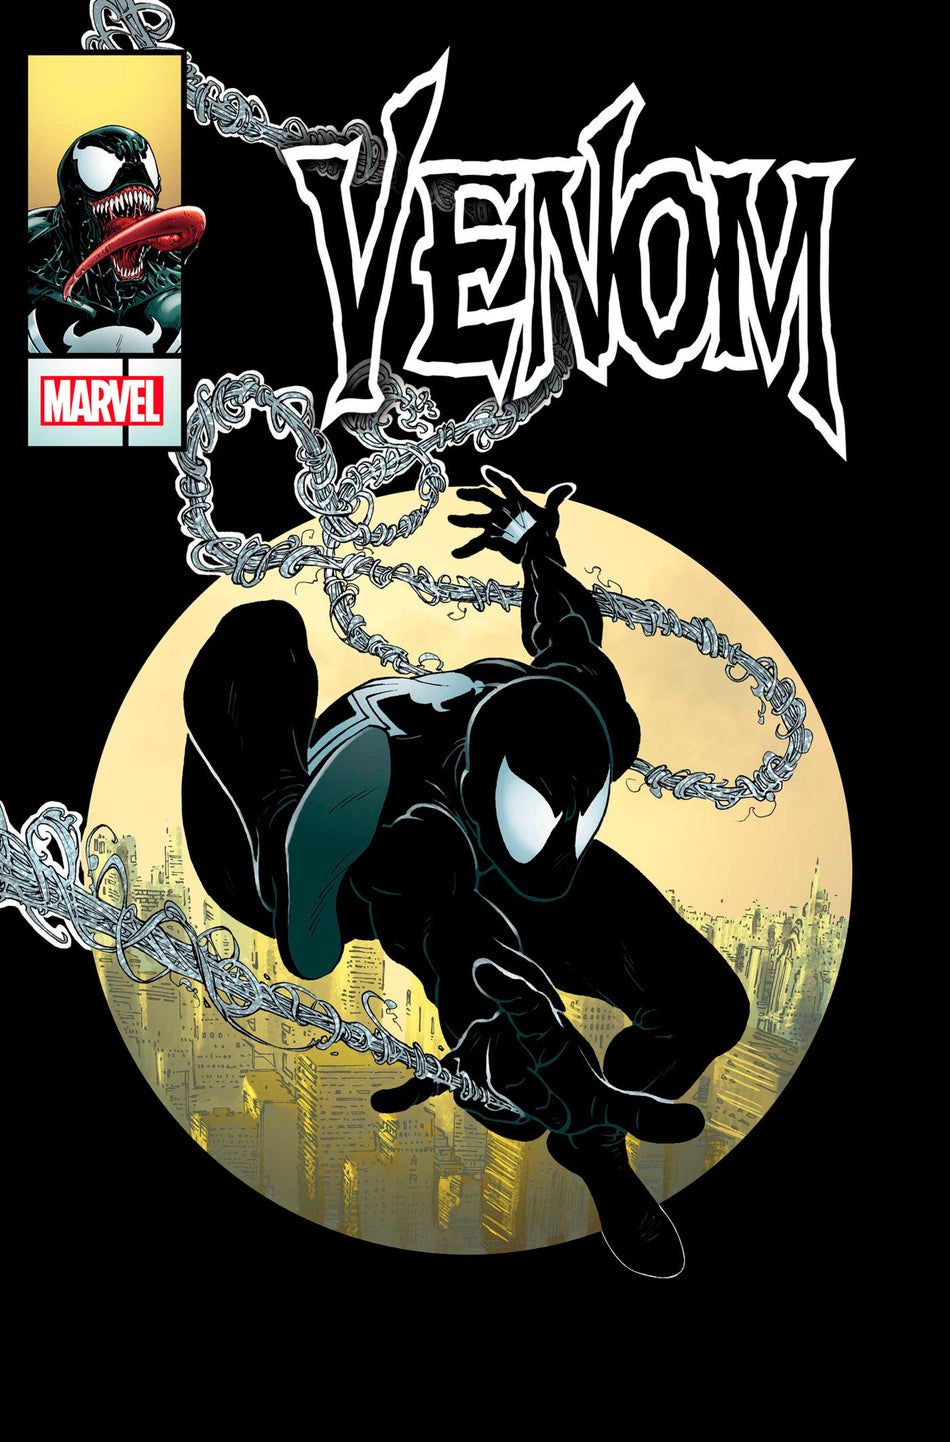 Image of Venom 4 Yardin Classic Homage Variant comic sold by Stronghold Collectibles.